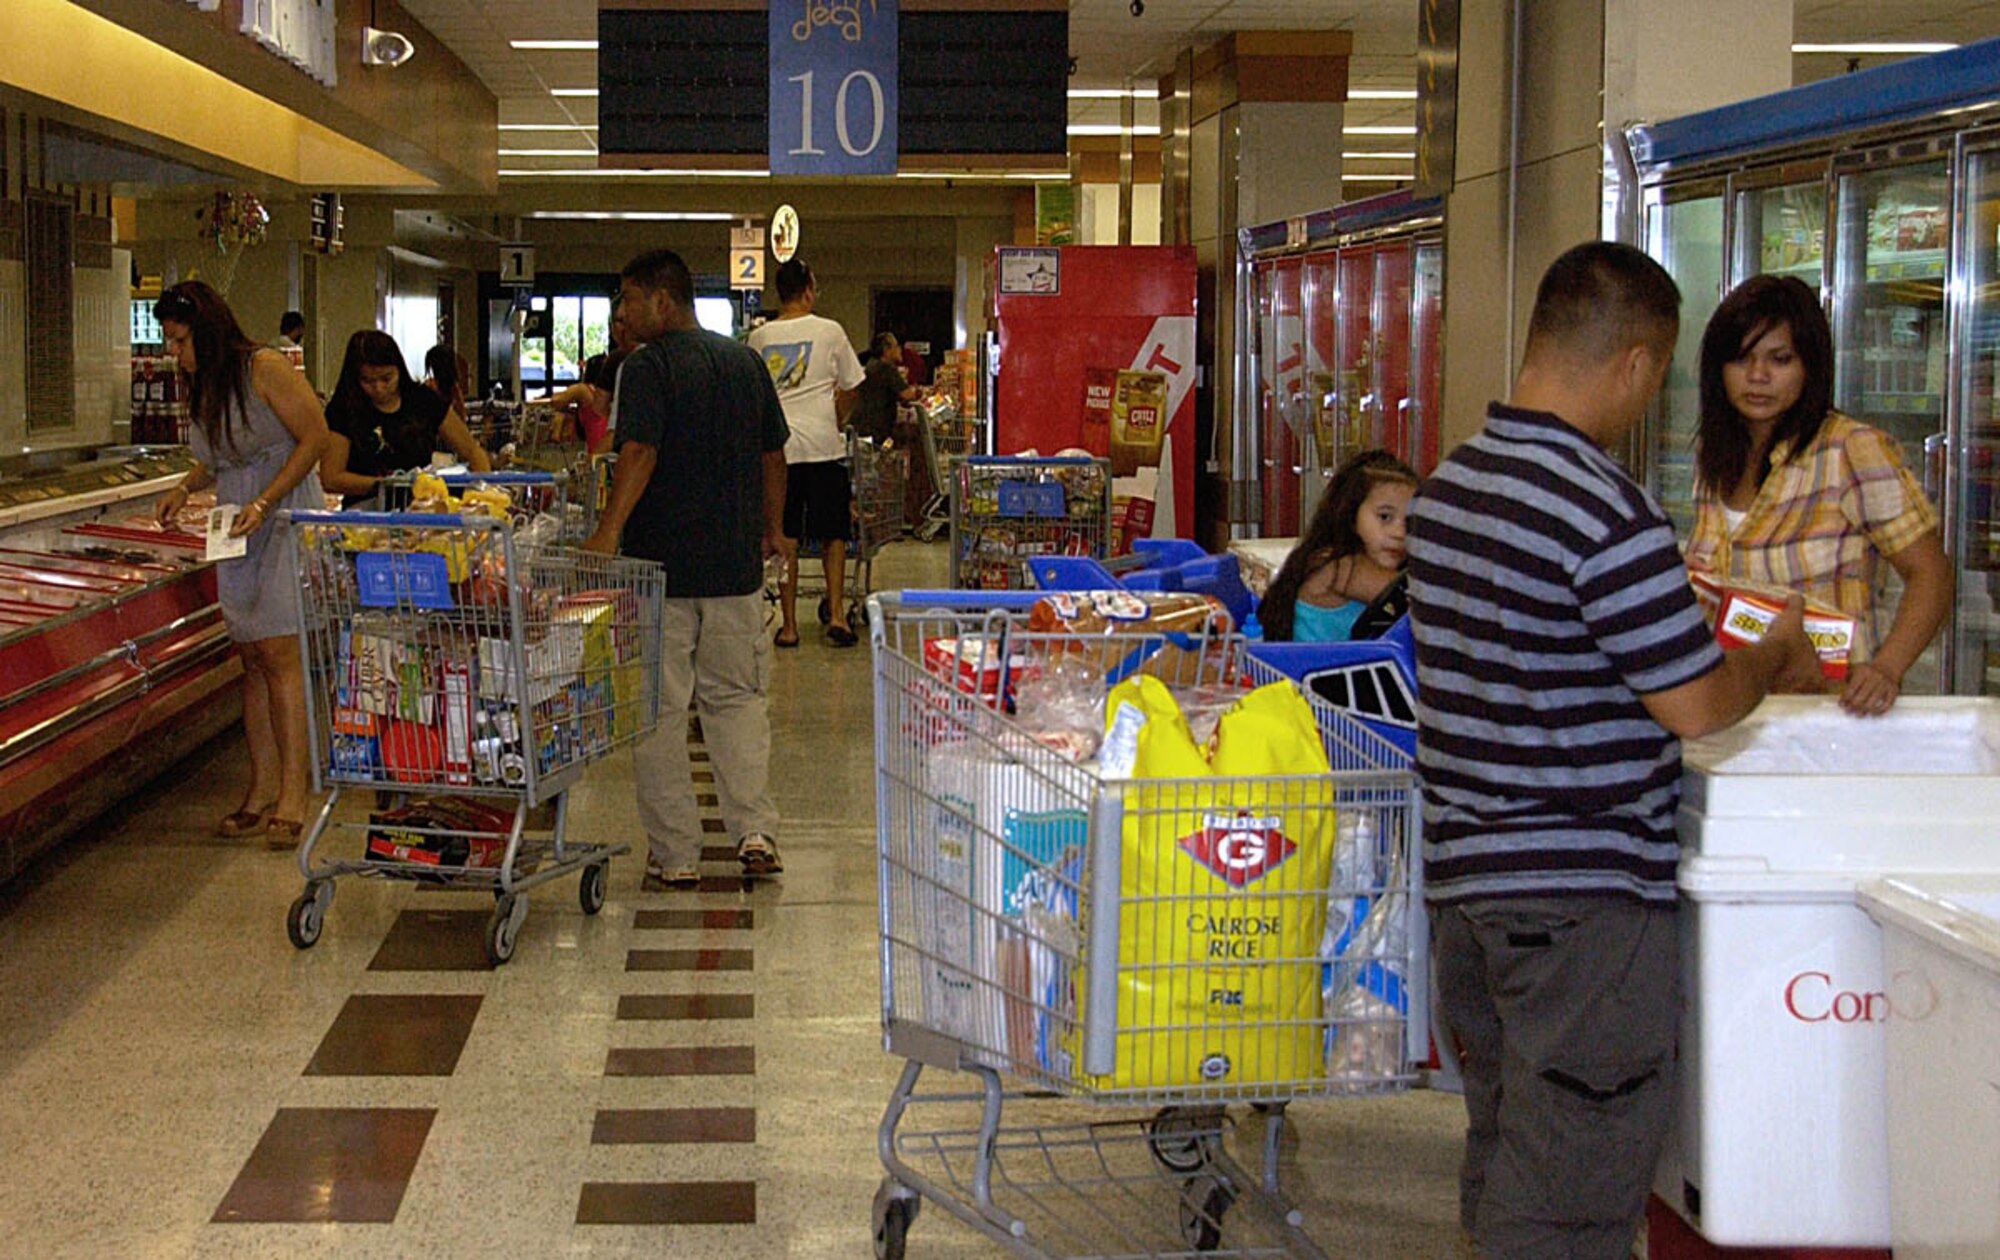 ANDERSEN AIR FORCE BASE, Guam -- Patrons do some Sunday shopping on aisle 10 at Andersen’s Commissary May 31. To better serve its patrons, the management at Andersen’s commissary permanently extended the store’s weekend hours to 7 a.m. to 7 p.m. June 6. (U.S. Air Force photo by Airman Carissa Wolff)